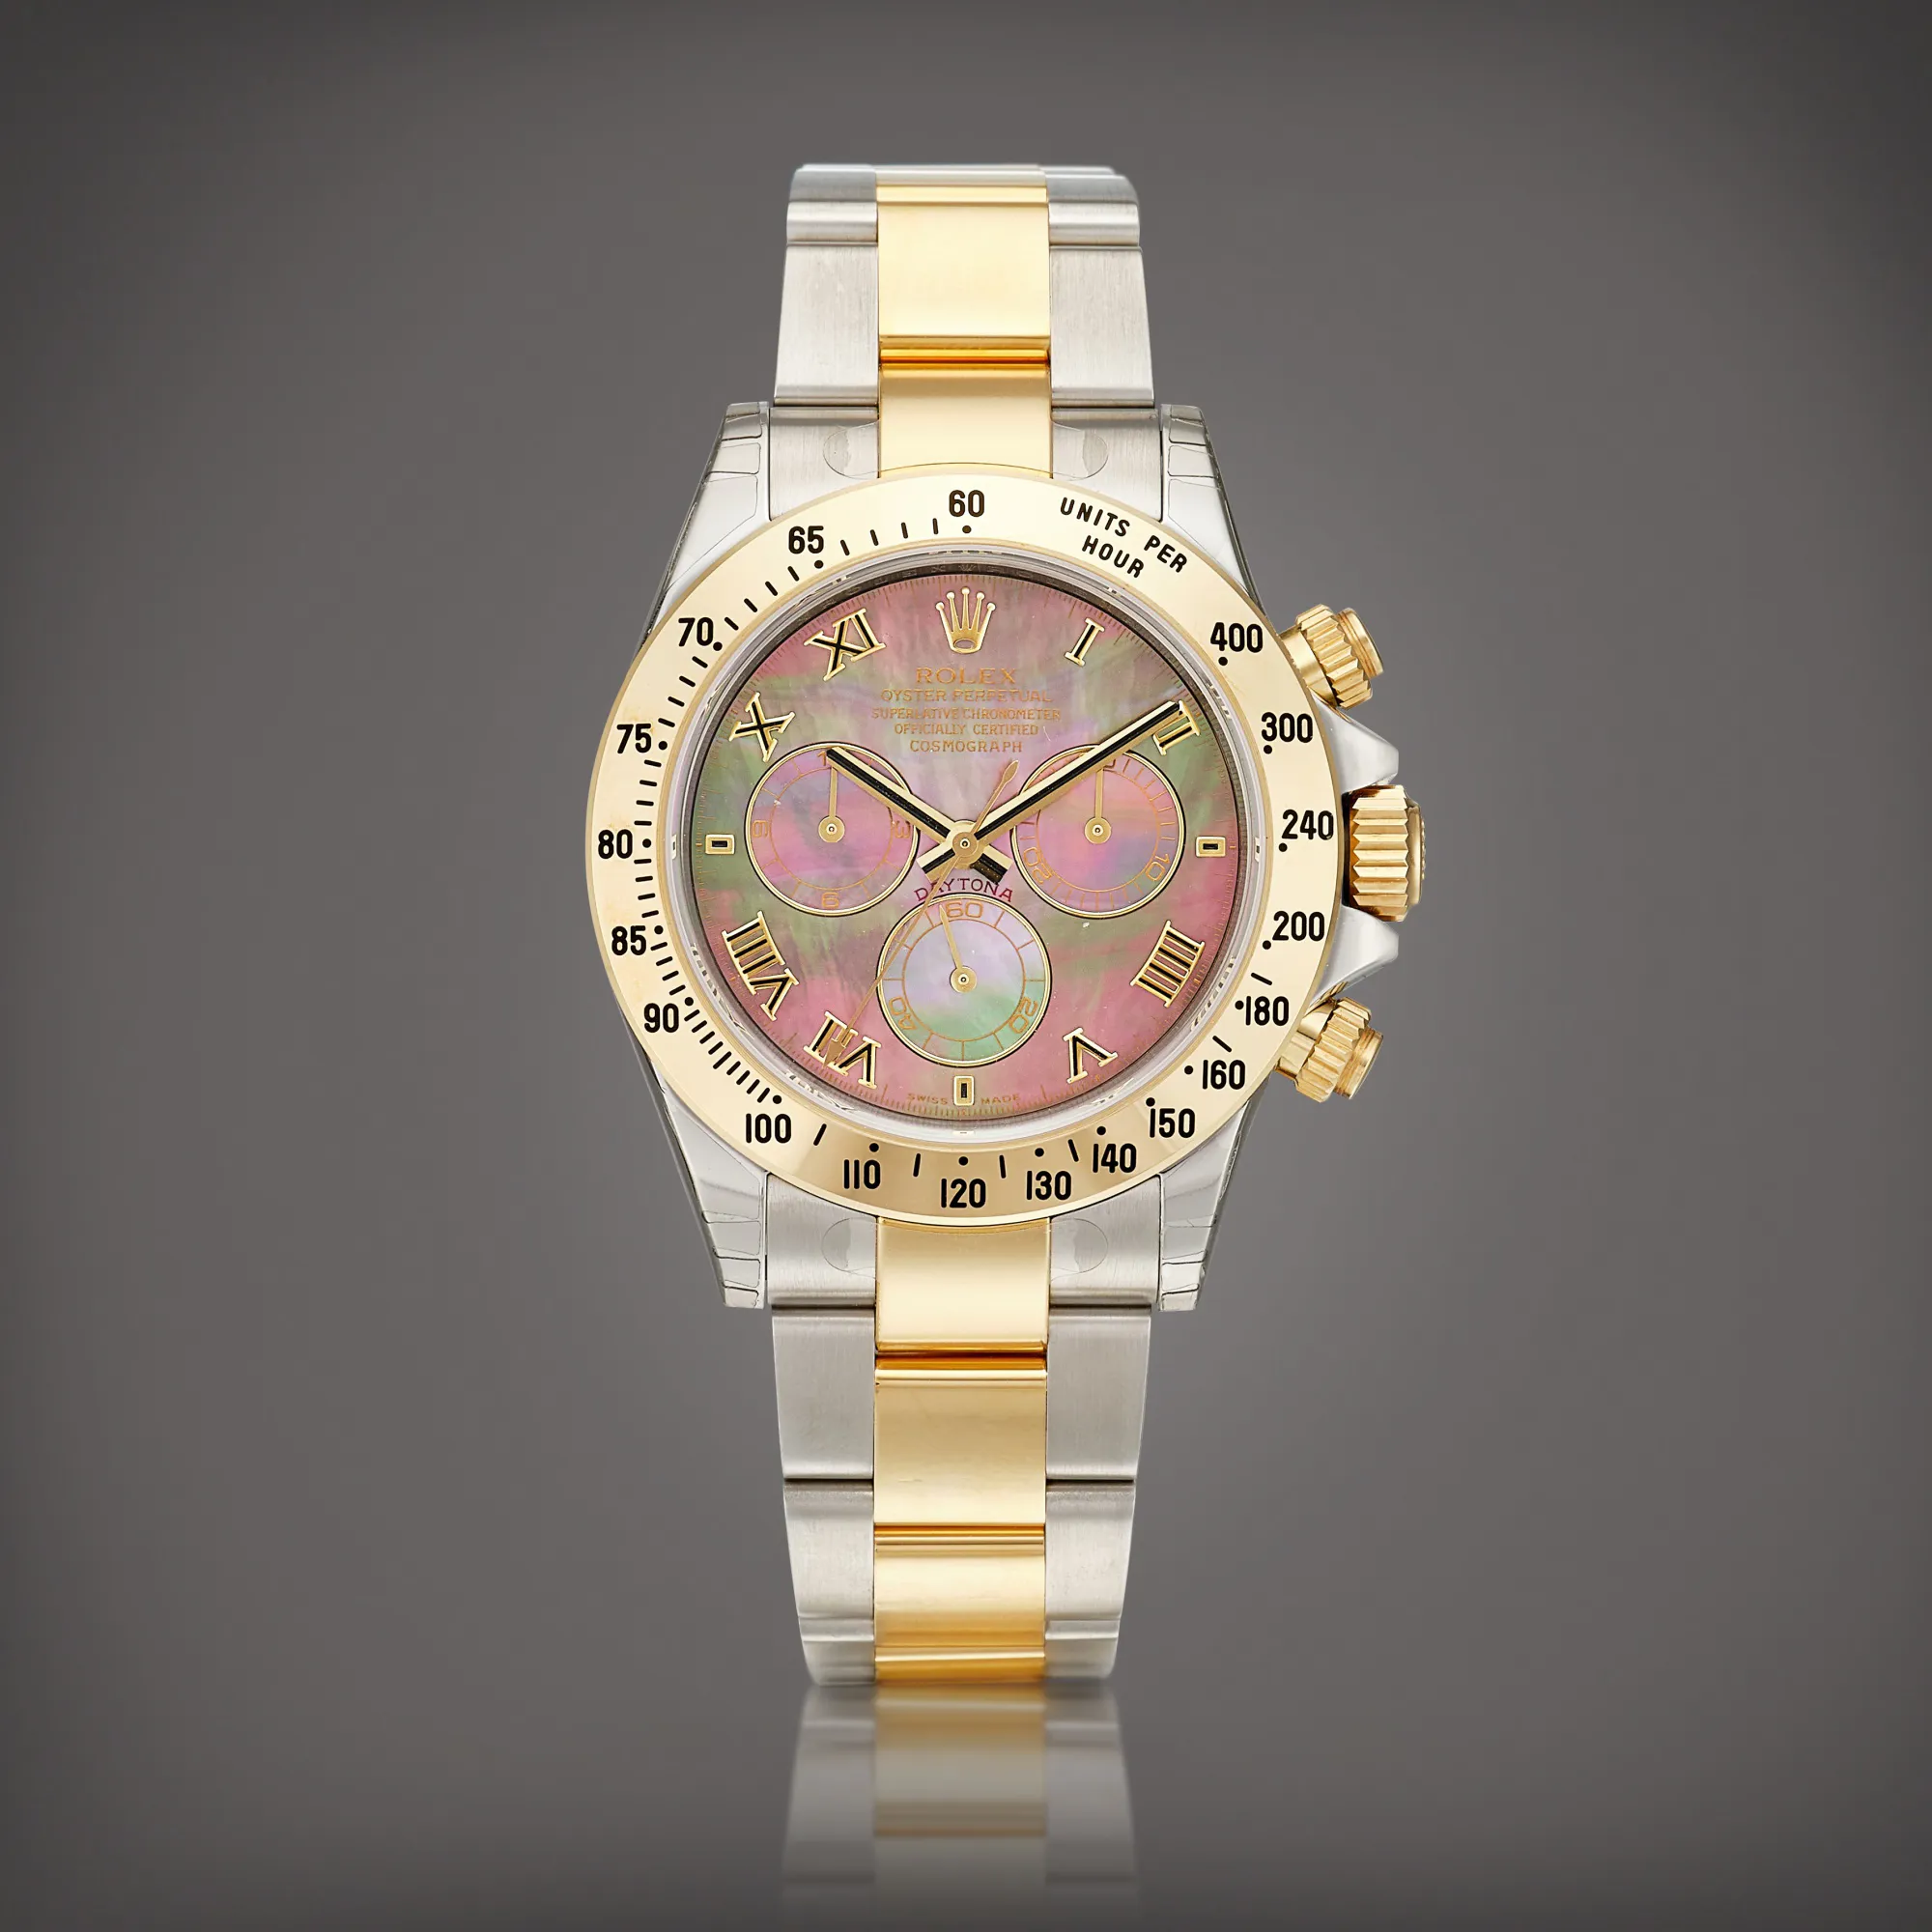 Rolex Daytona 116523 40mm Yellow gold and stainless steel Mother-of-pearl